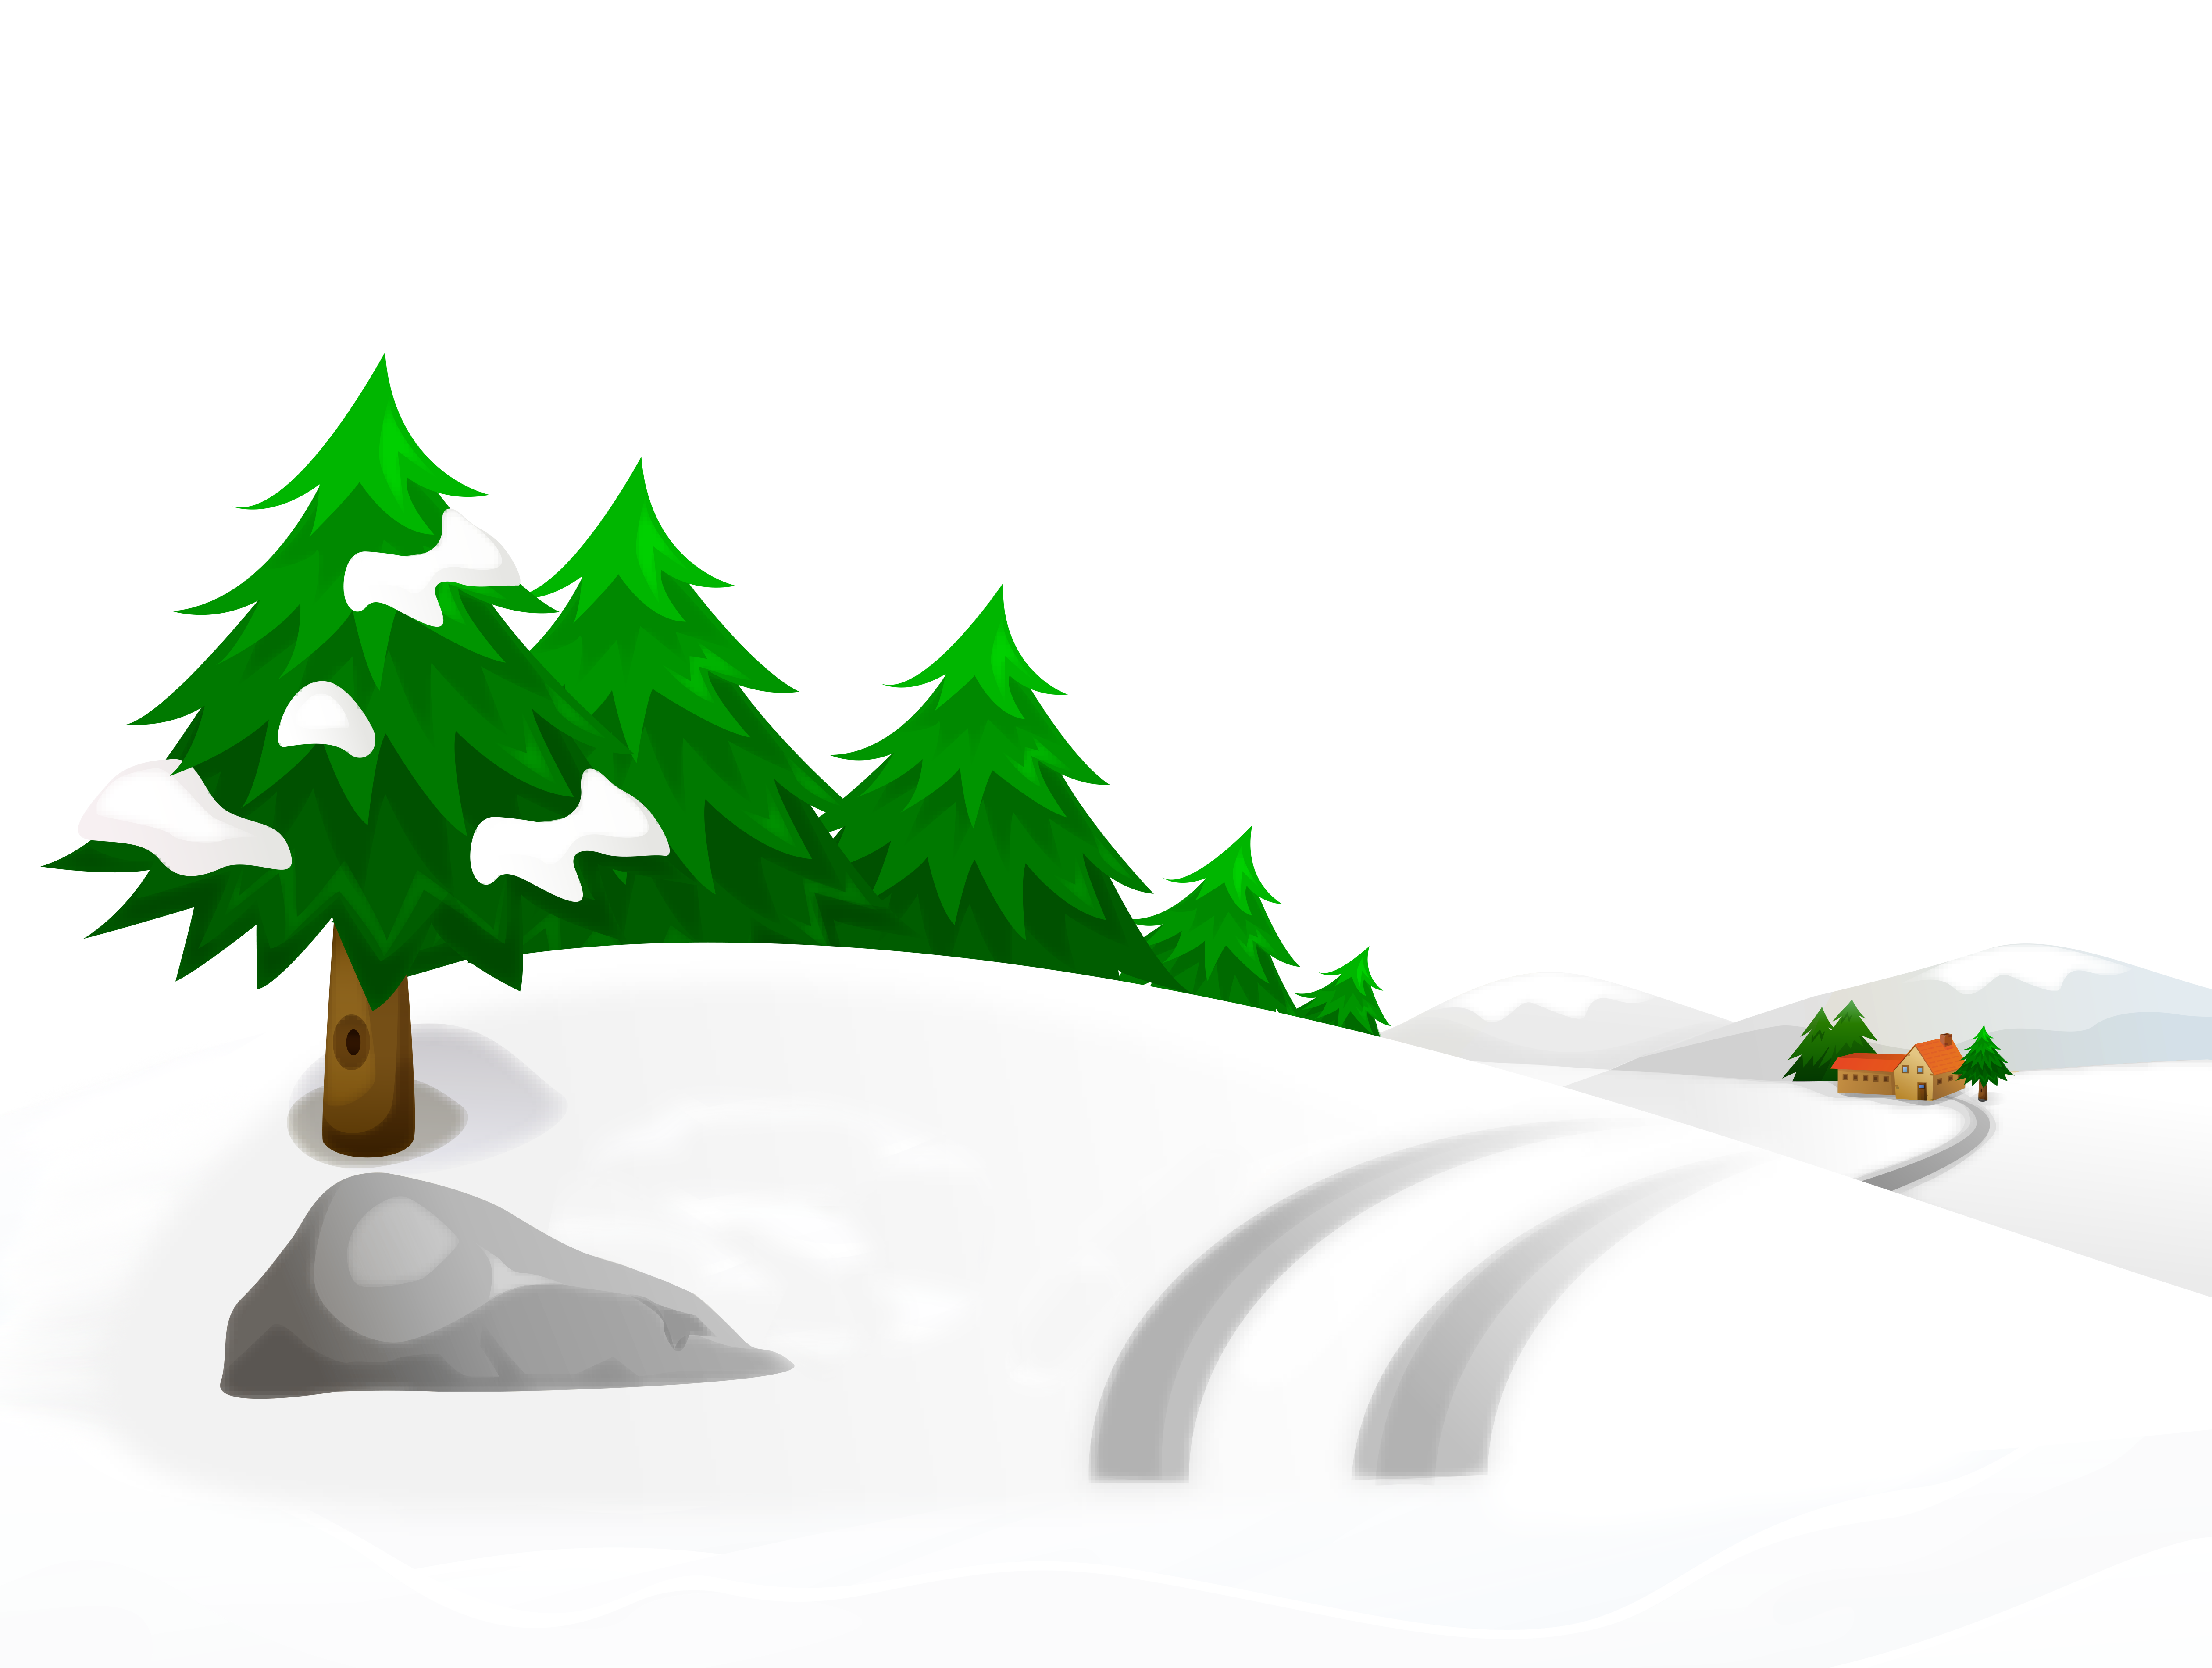 Snowy ground with trees. Piano clipart winter